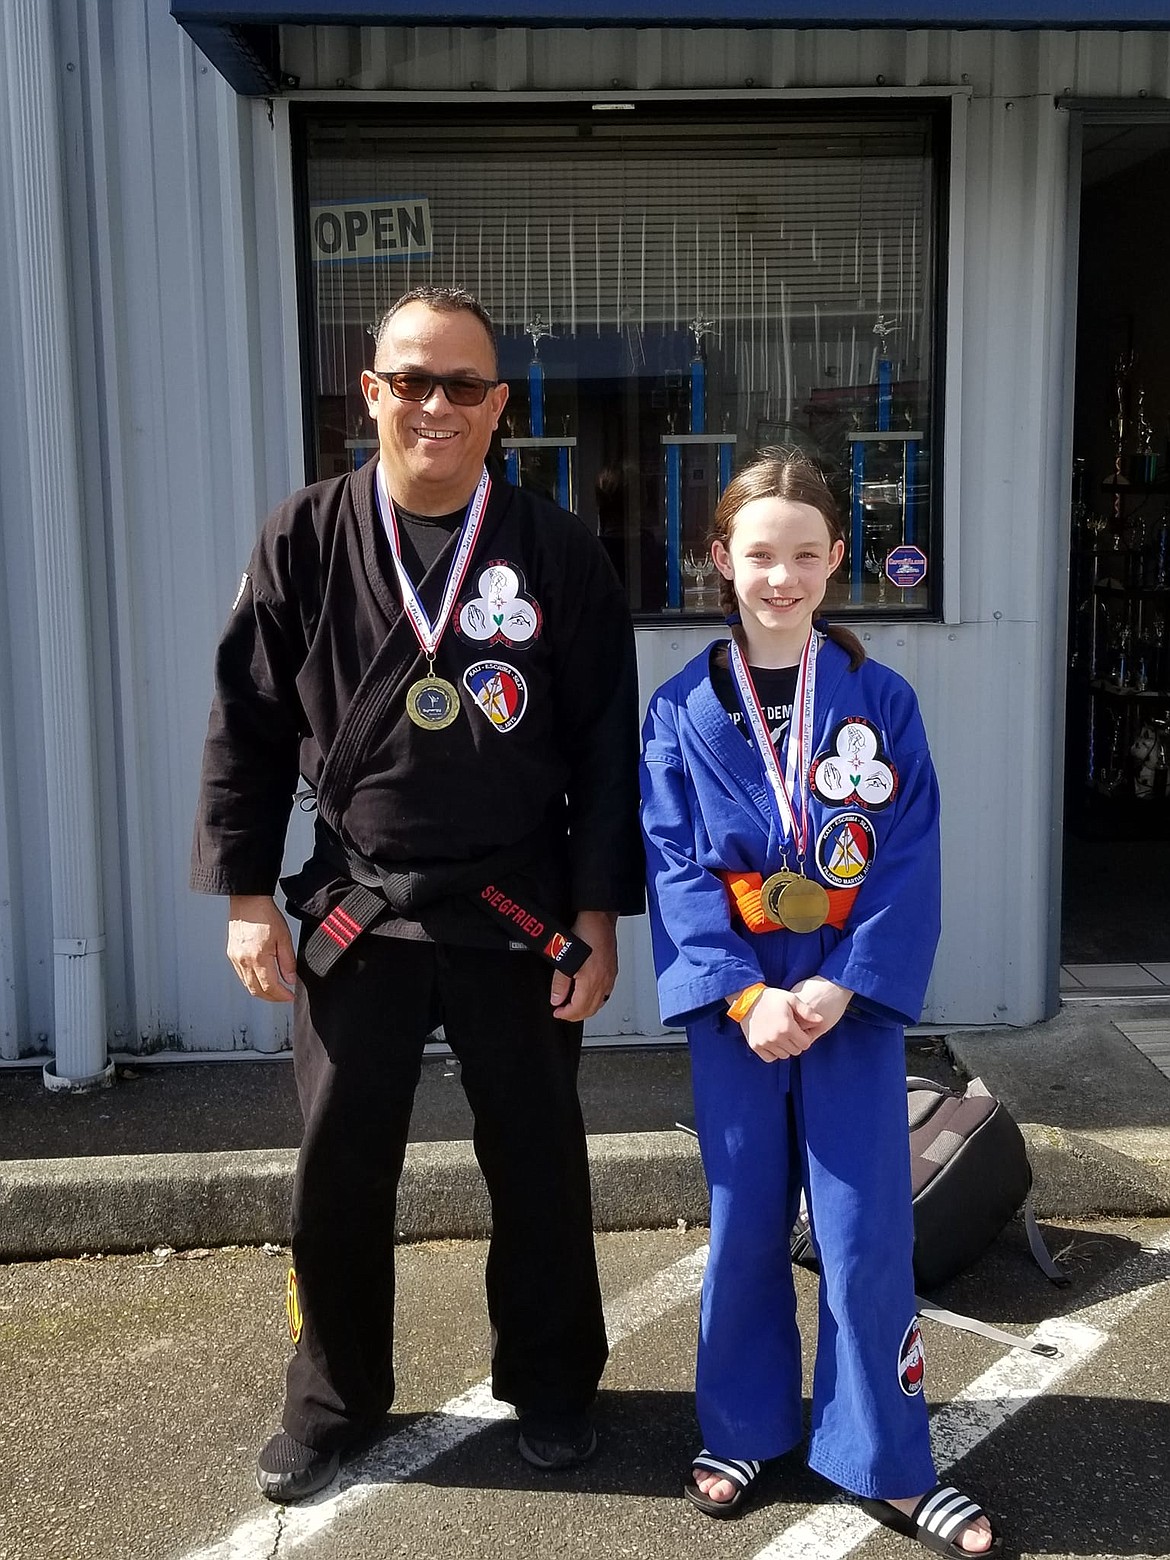 Martial arts instructor Mike "Ziggy" Siegfried and his young protege' 12-year-old Alannah Winland. Following Winland's first karate tournament, she walked away with a silver and a bronze medal, despite competing against older, male competitors with higher ranking than she has.